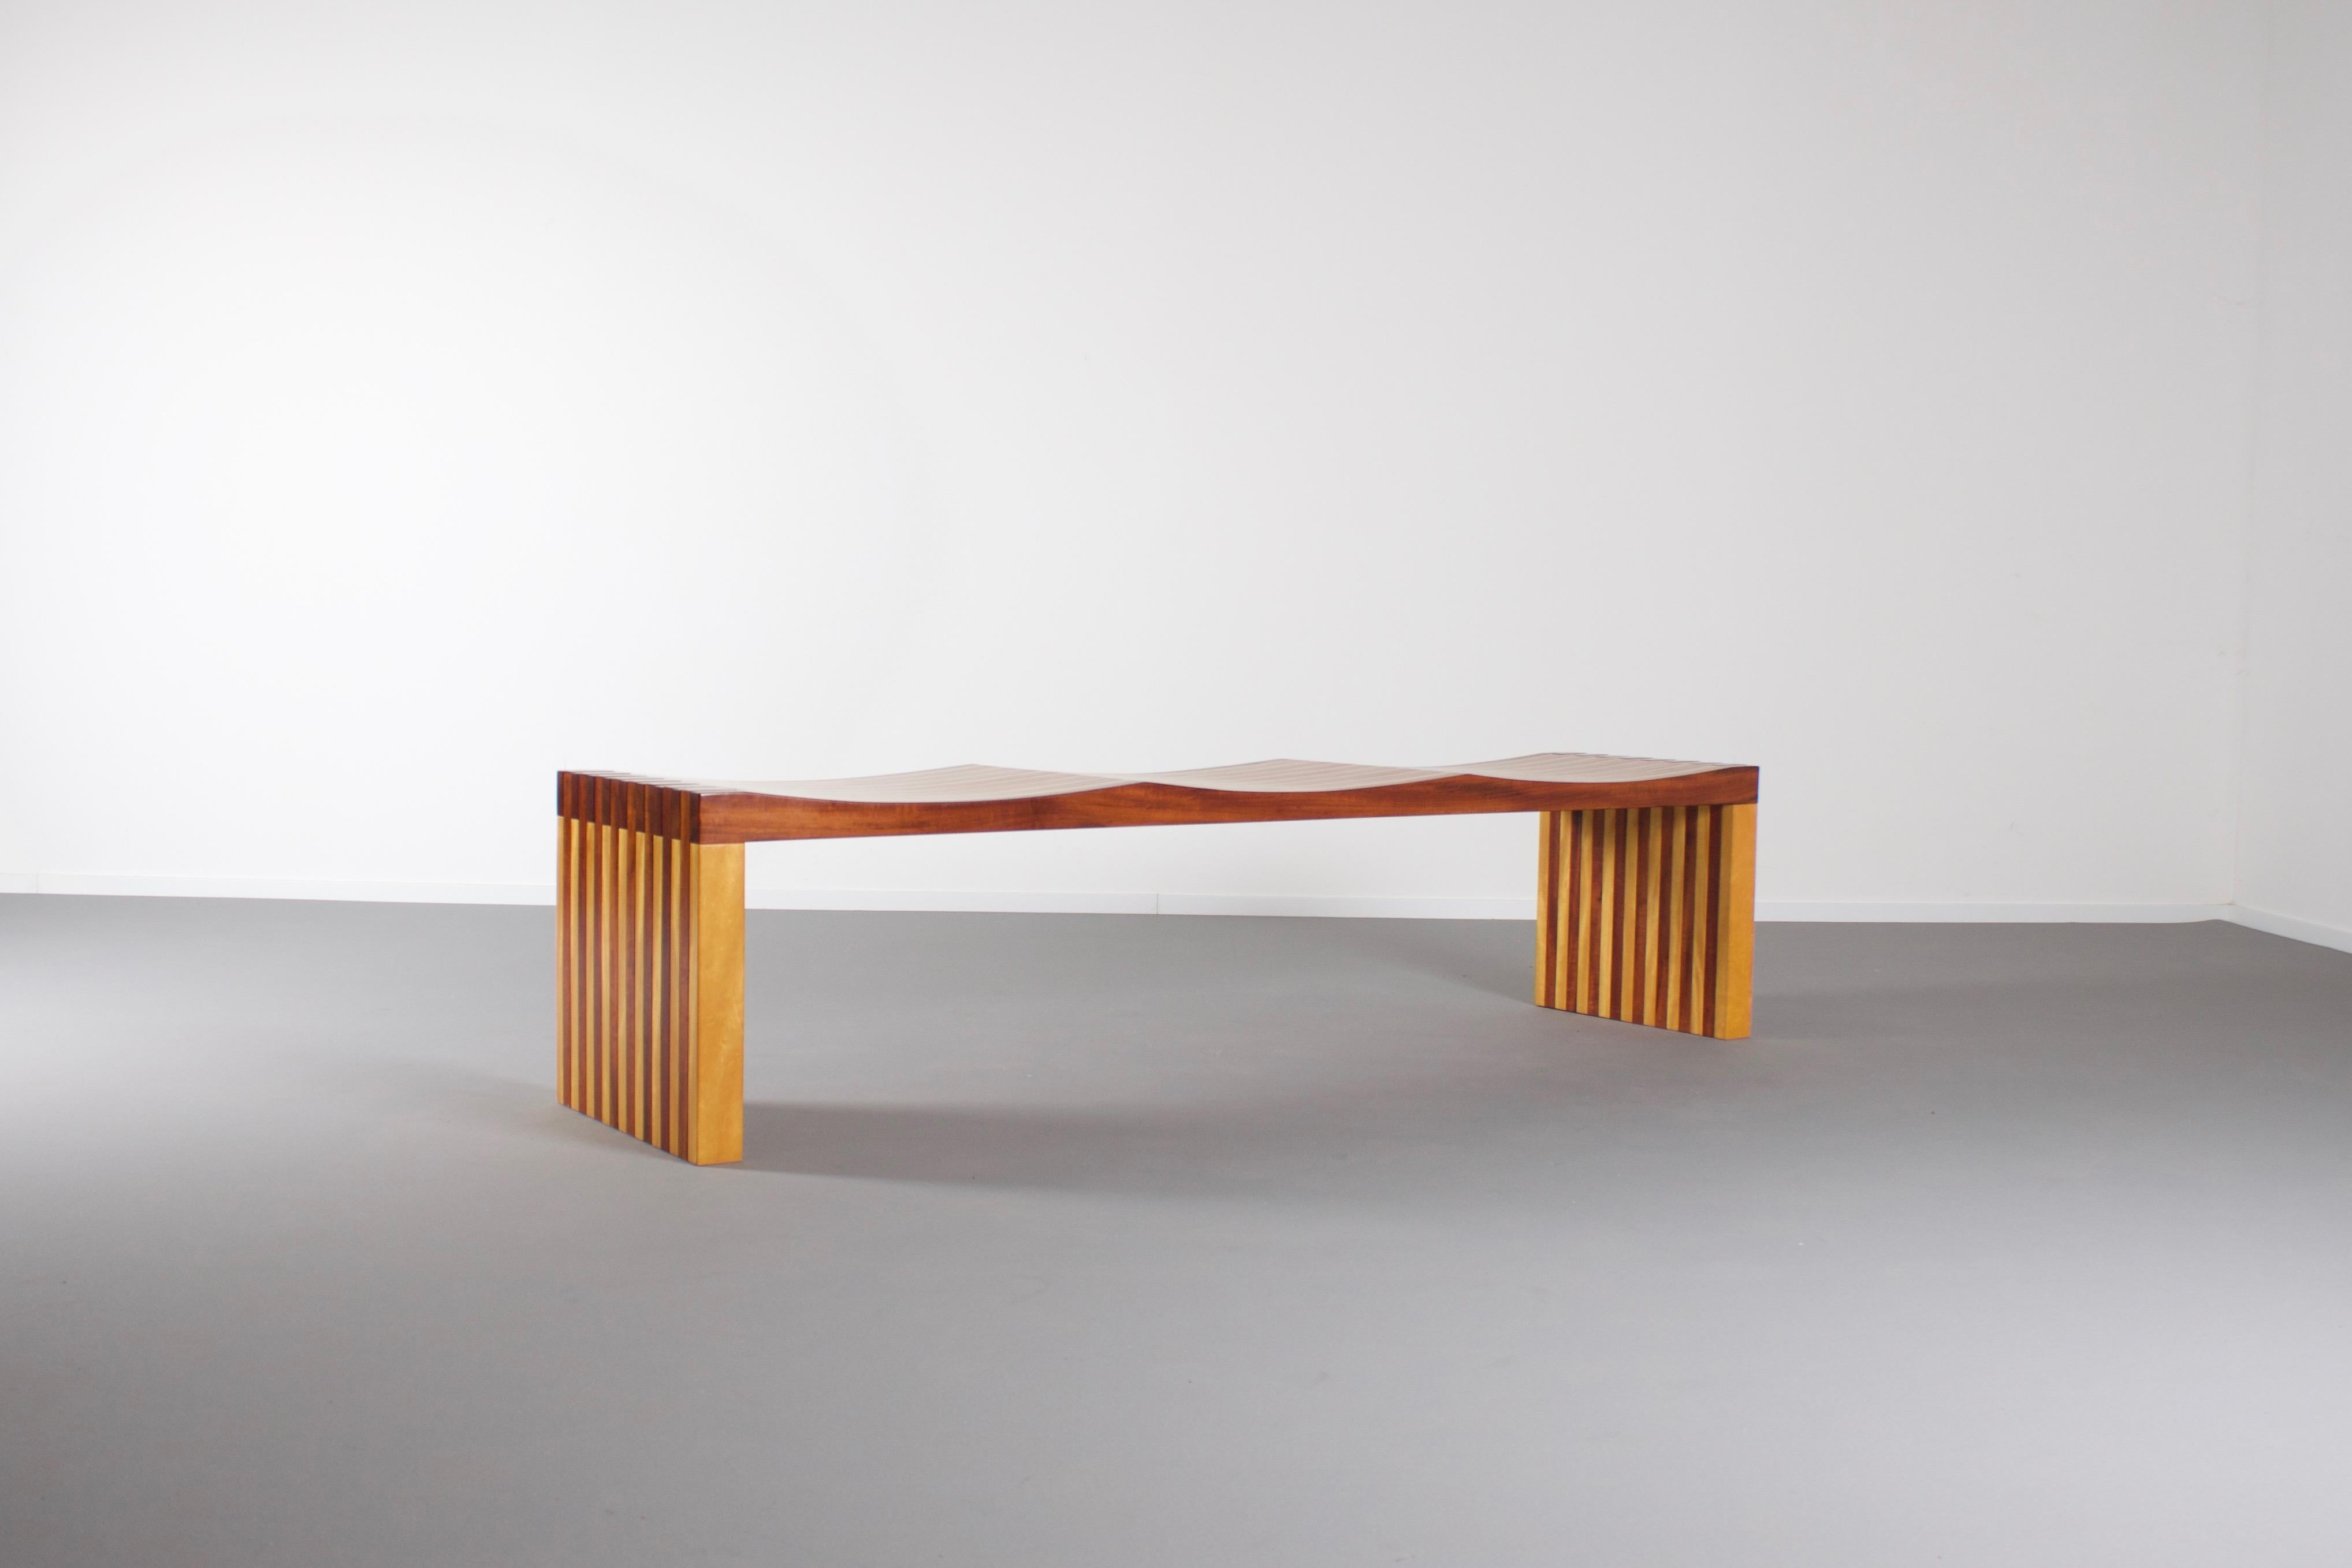 Exceptional ‘Ressaquinha’ bench in excellent condition.

Designed by the Brazilian architect Mauricio Azeredo.

This 3-seat bench is made of three different Brazilian woods: Cumaru, Muirapiranga and Pau-Ouro.

It is beautifully shaped and combines